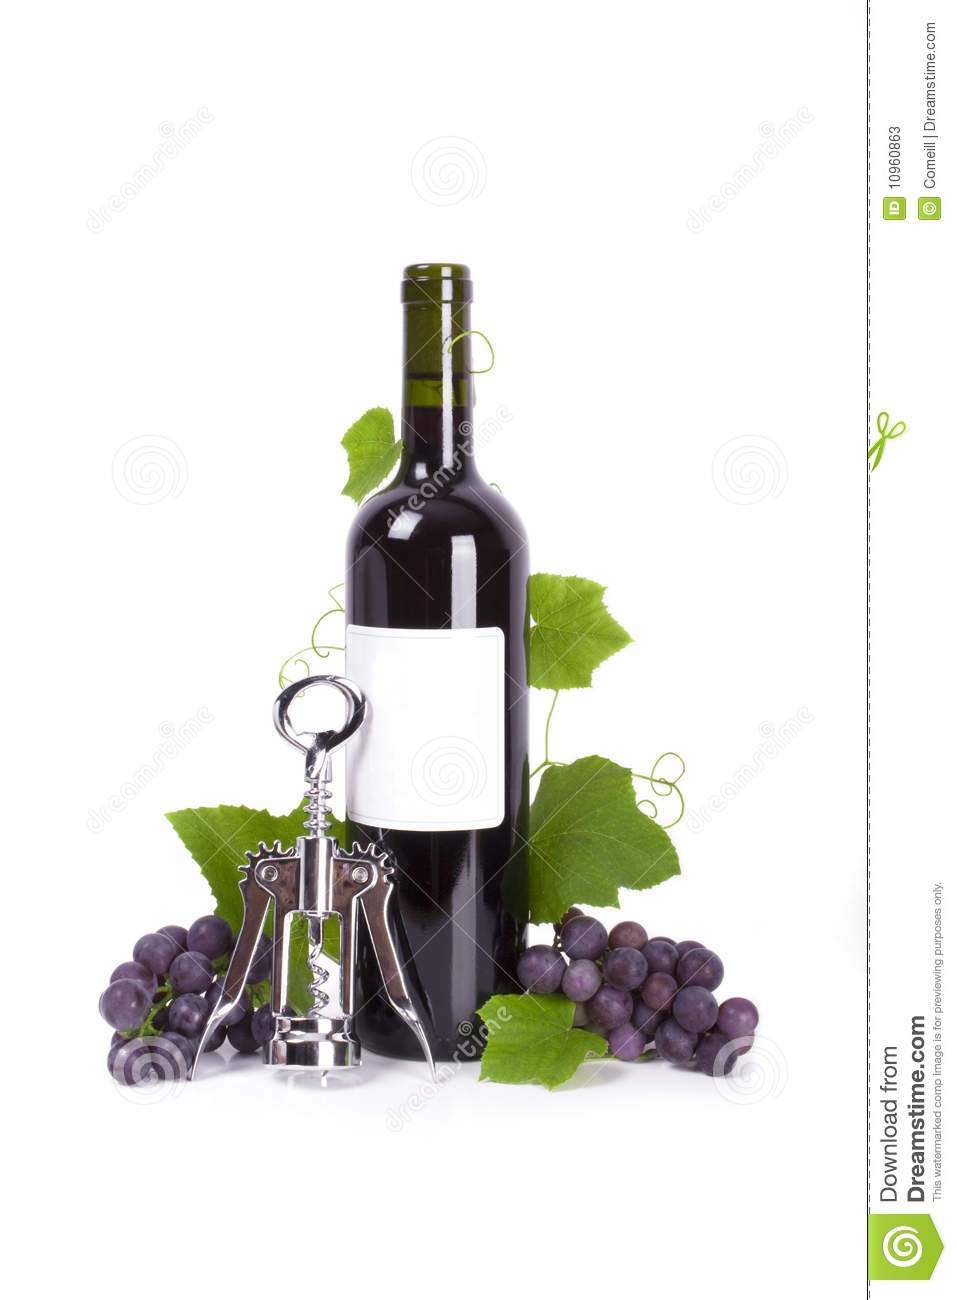 Bottle Of Wine Grapes With Leaves And Cork Screw Isolated On White    